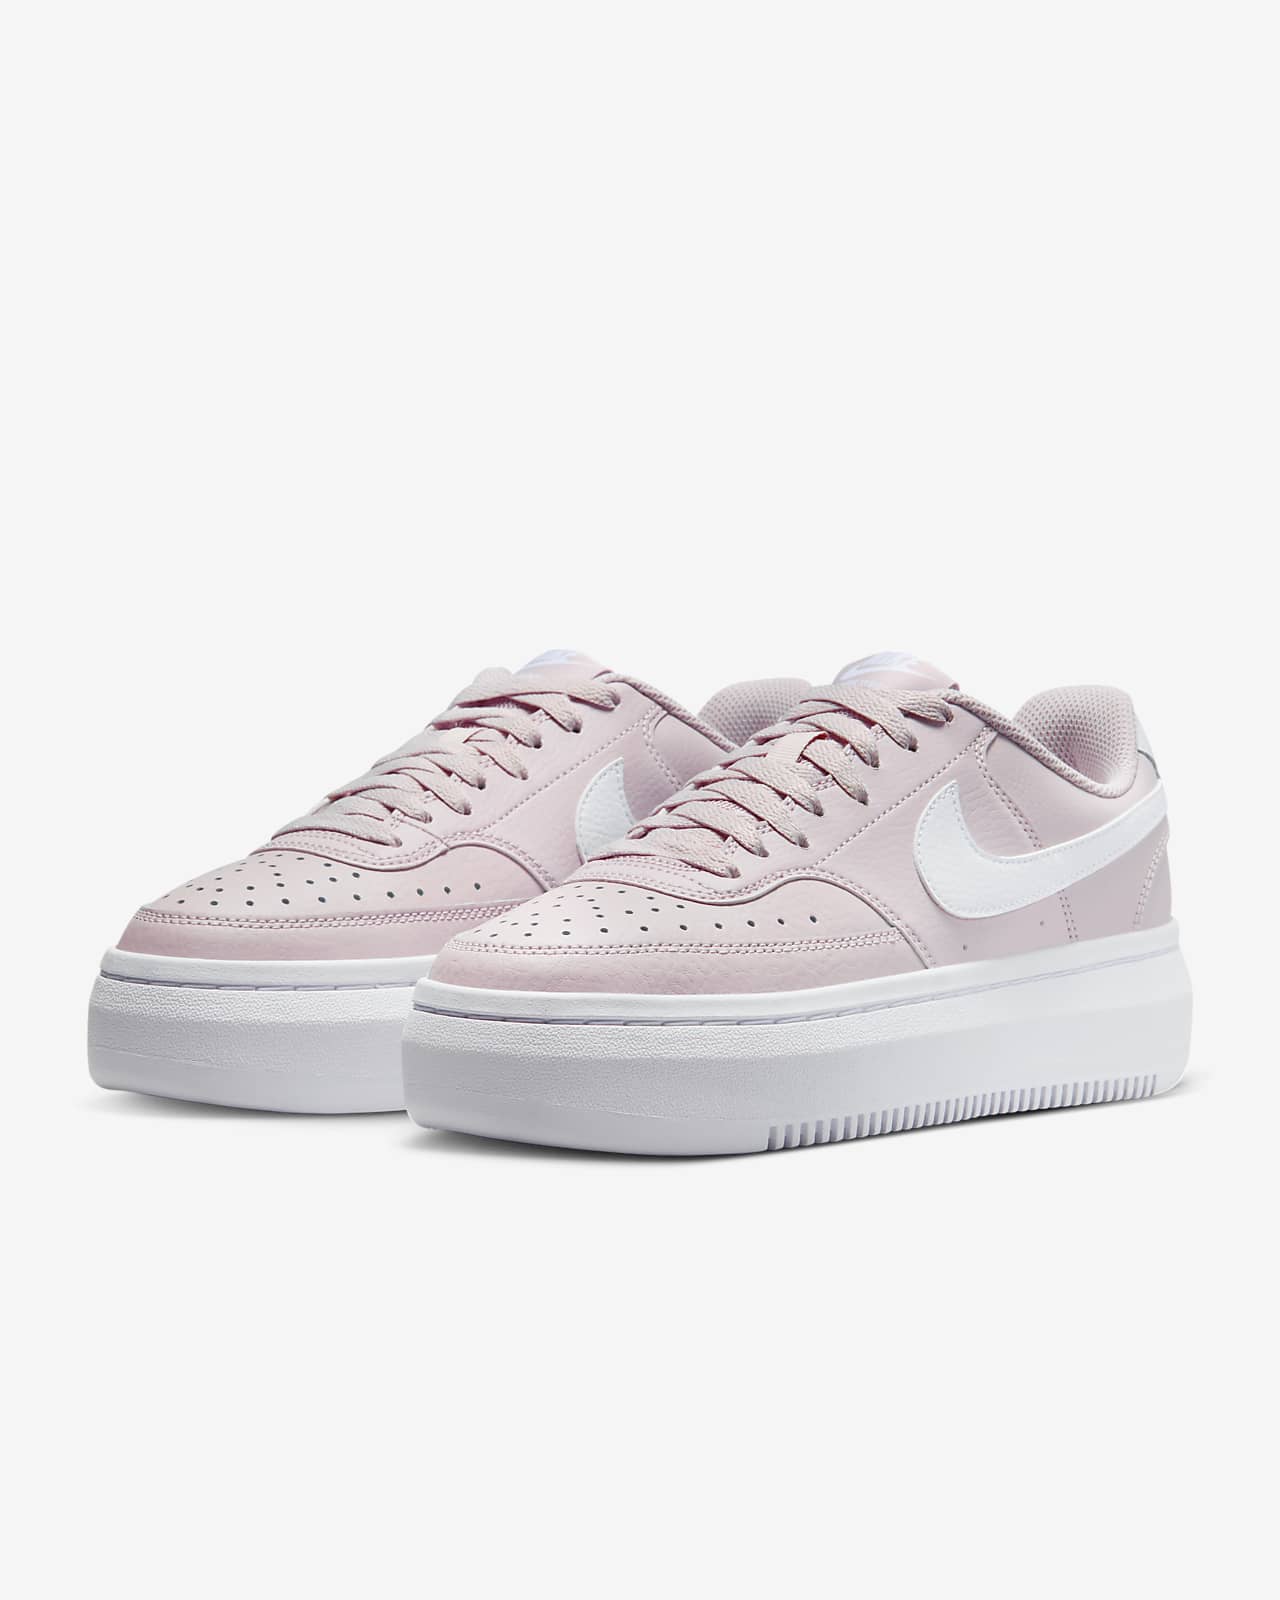 Tenis NIKE COURT VISION ALTA Mujer DO2791-100 Casual Blanco